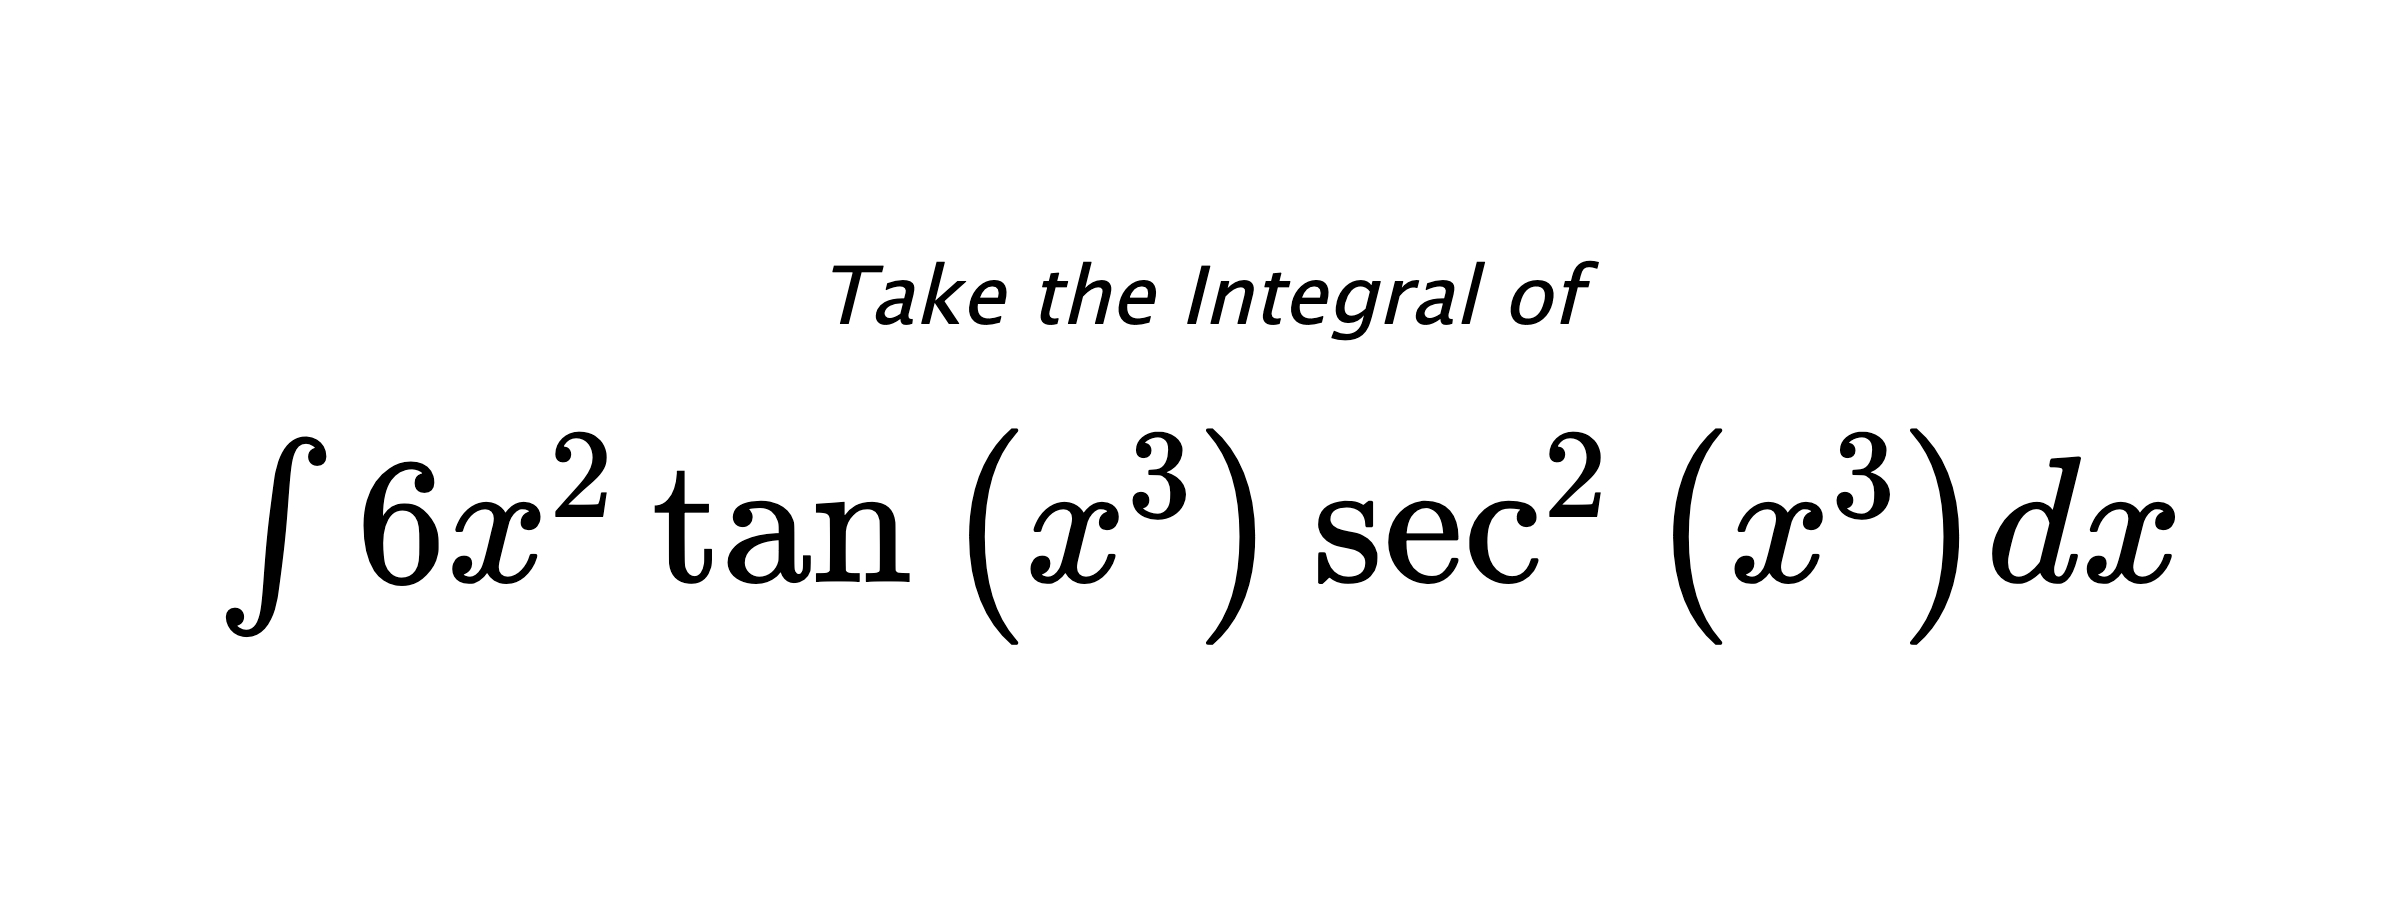 Take the Integral of $ \int 6 x^{2} \tan{\left(x^{3} \right)} \sec^{2}{\left(x^{3} \right)} dx $